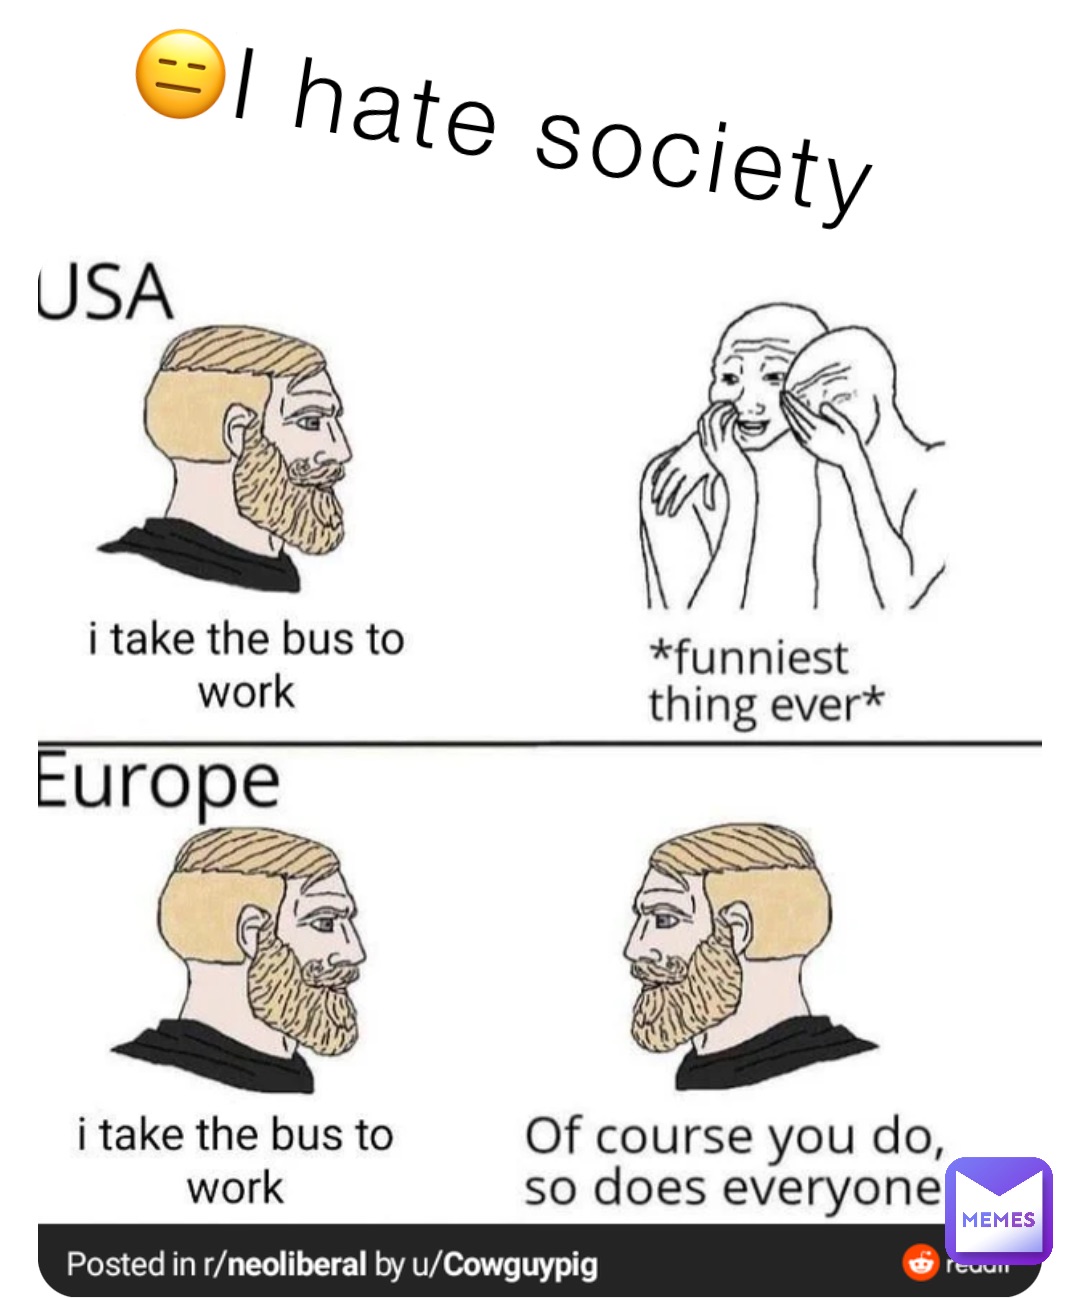 Hate this society